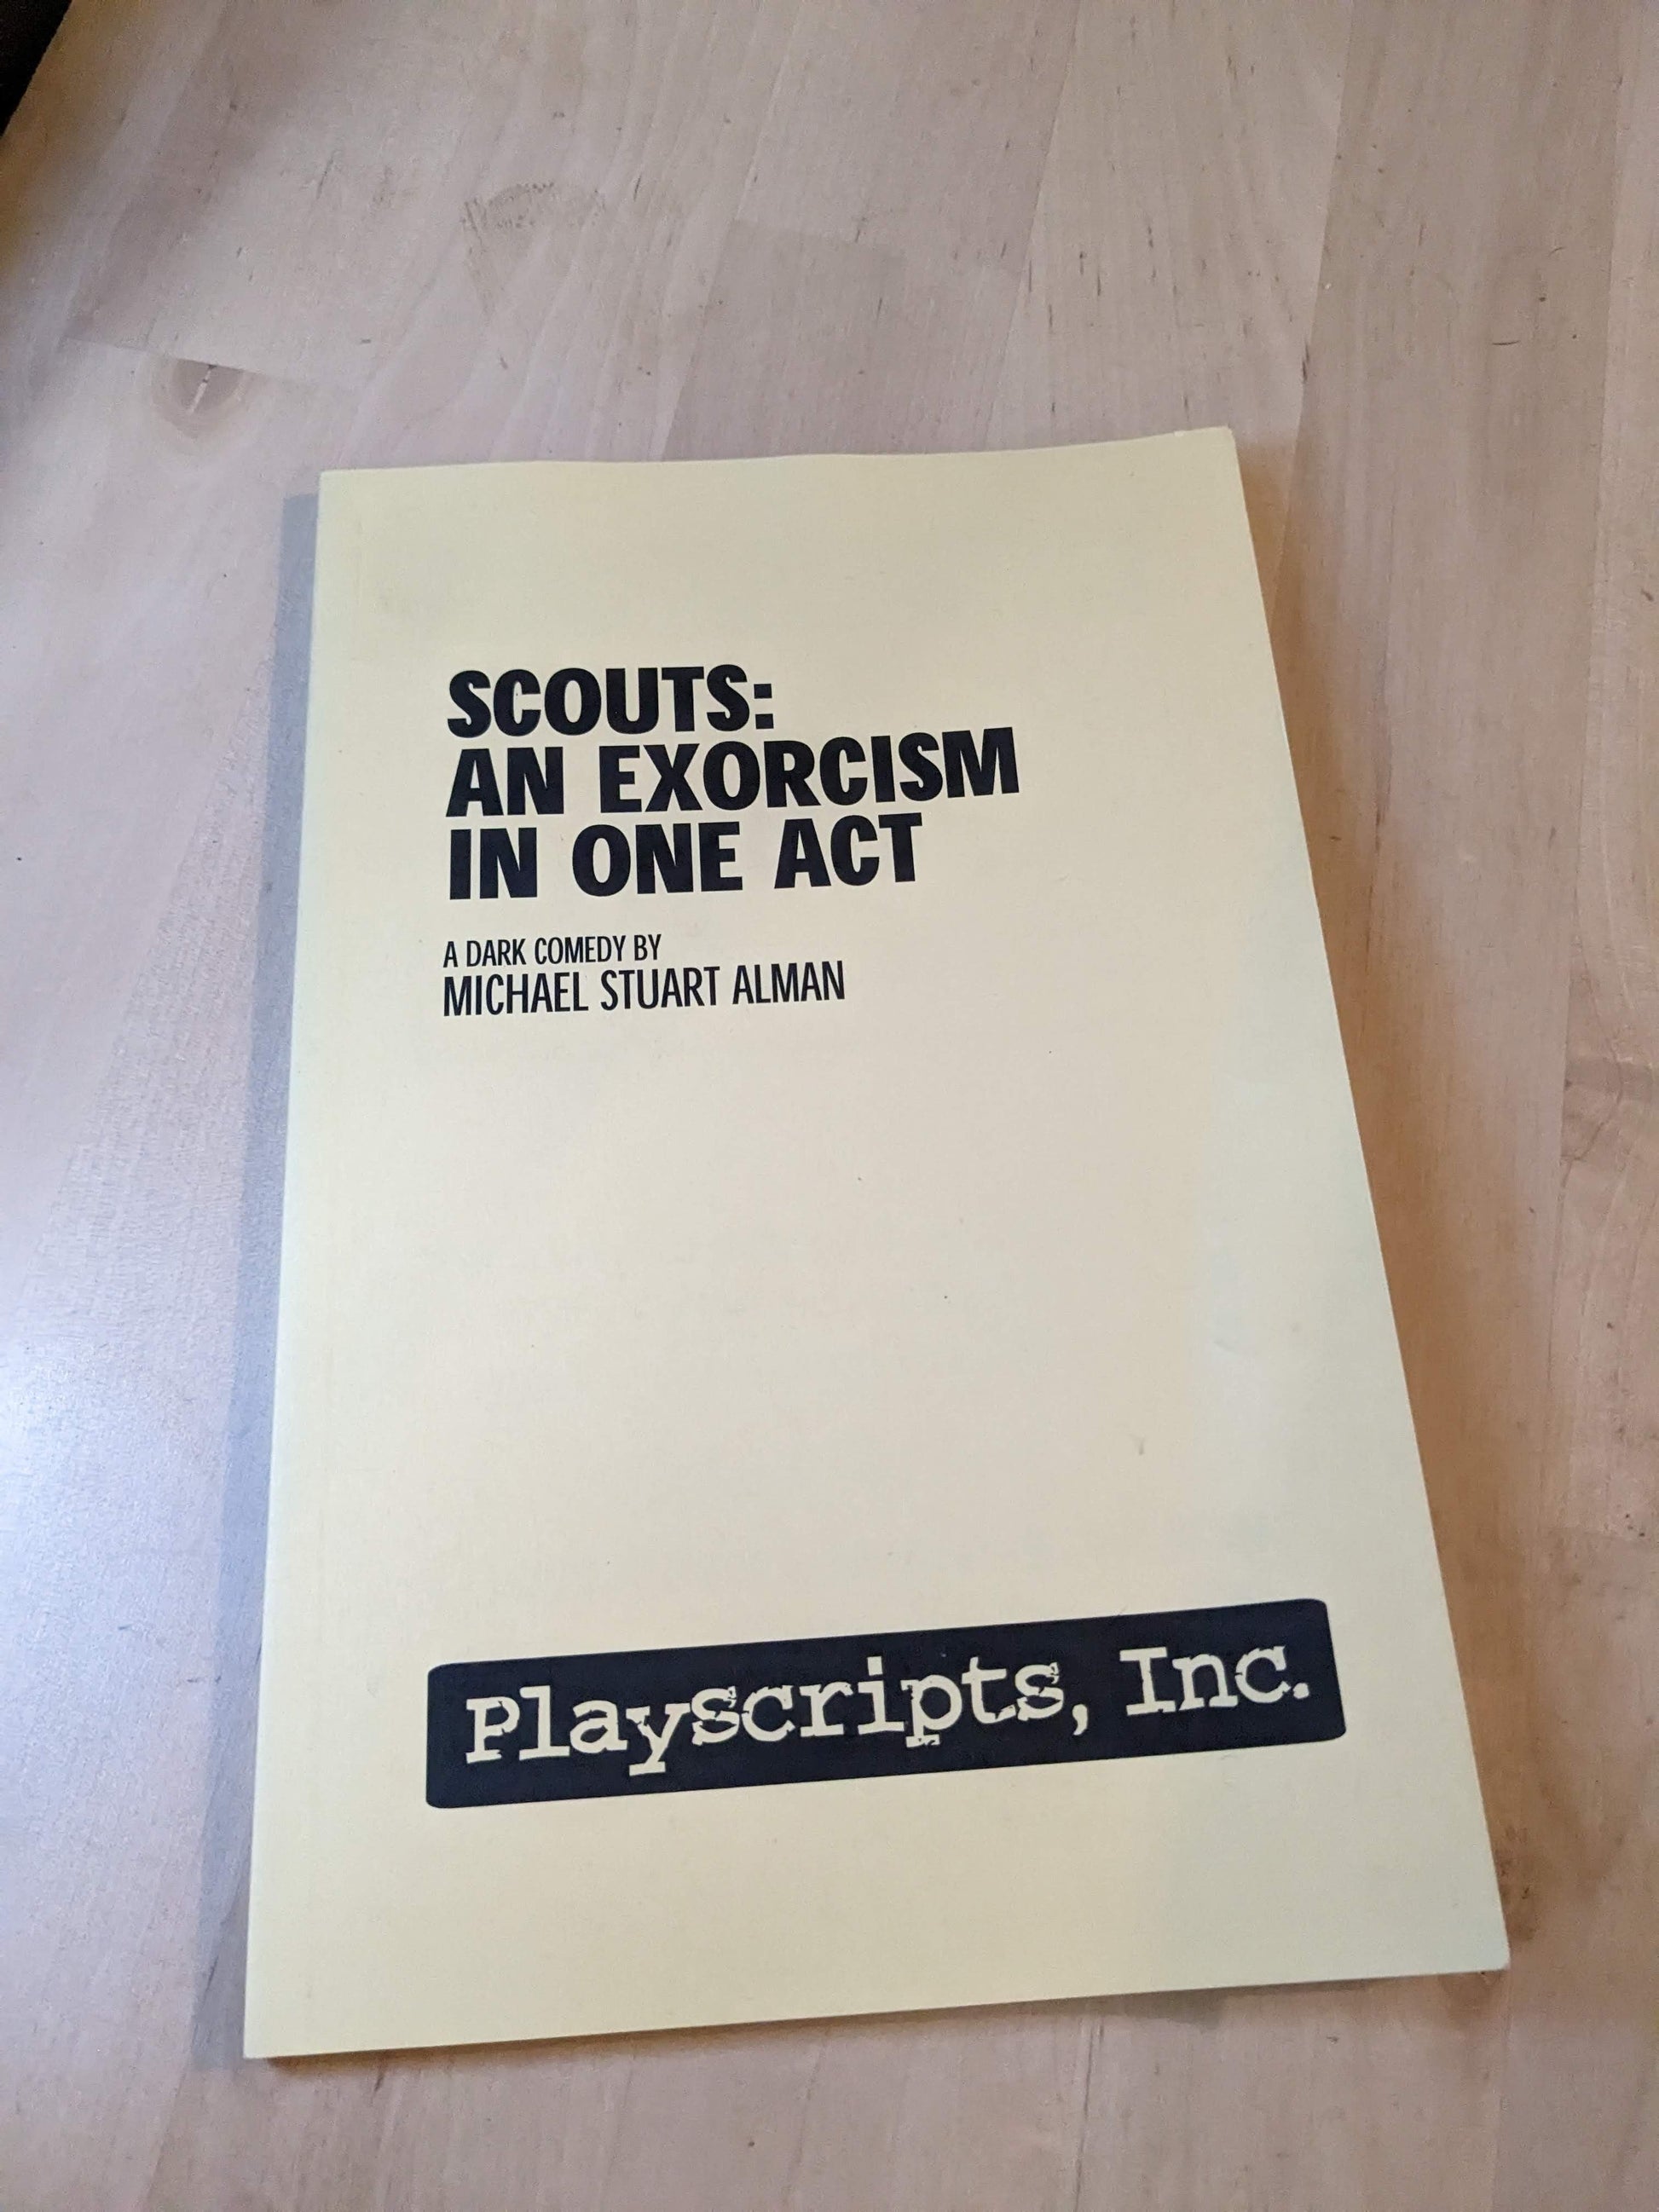 SCOUTS: An Exorcism in One Act (Theatrical Play Script) by Michael Stuart Alman - Asylum Books